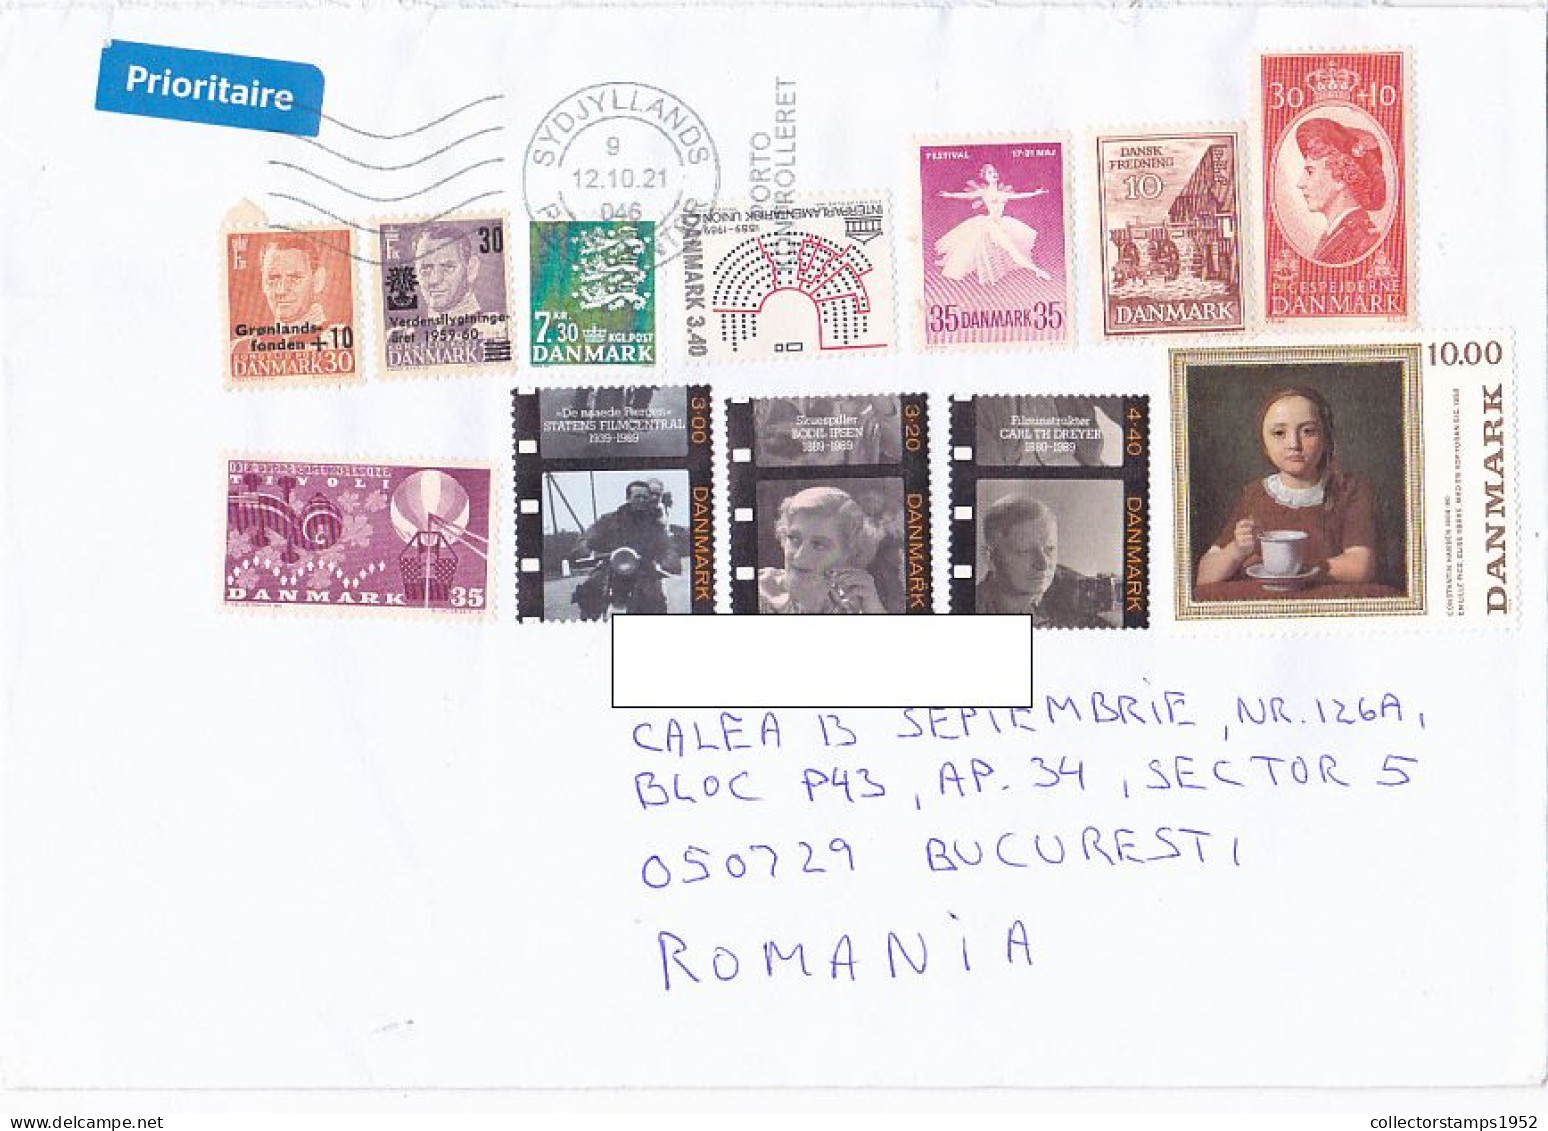 KING FREDERICK IX, ACTORS, PERSONALITIES, PAINTING, PARLIAMENT, FINE STAMPS ON COVER, 2021, DENMARK - Lettres & Documents